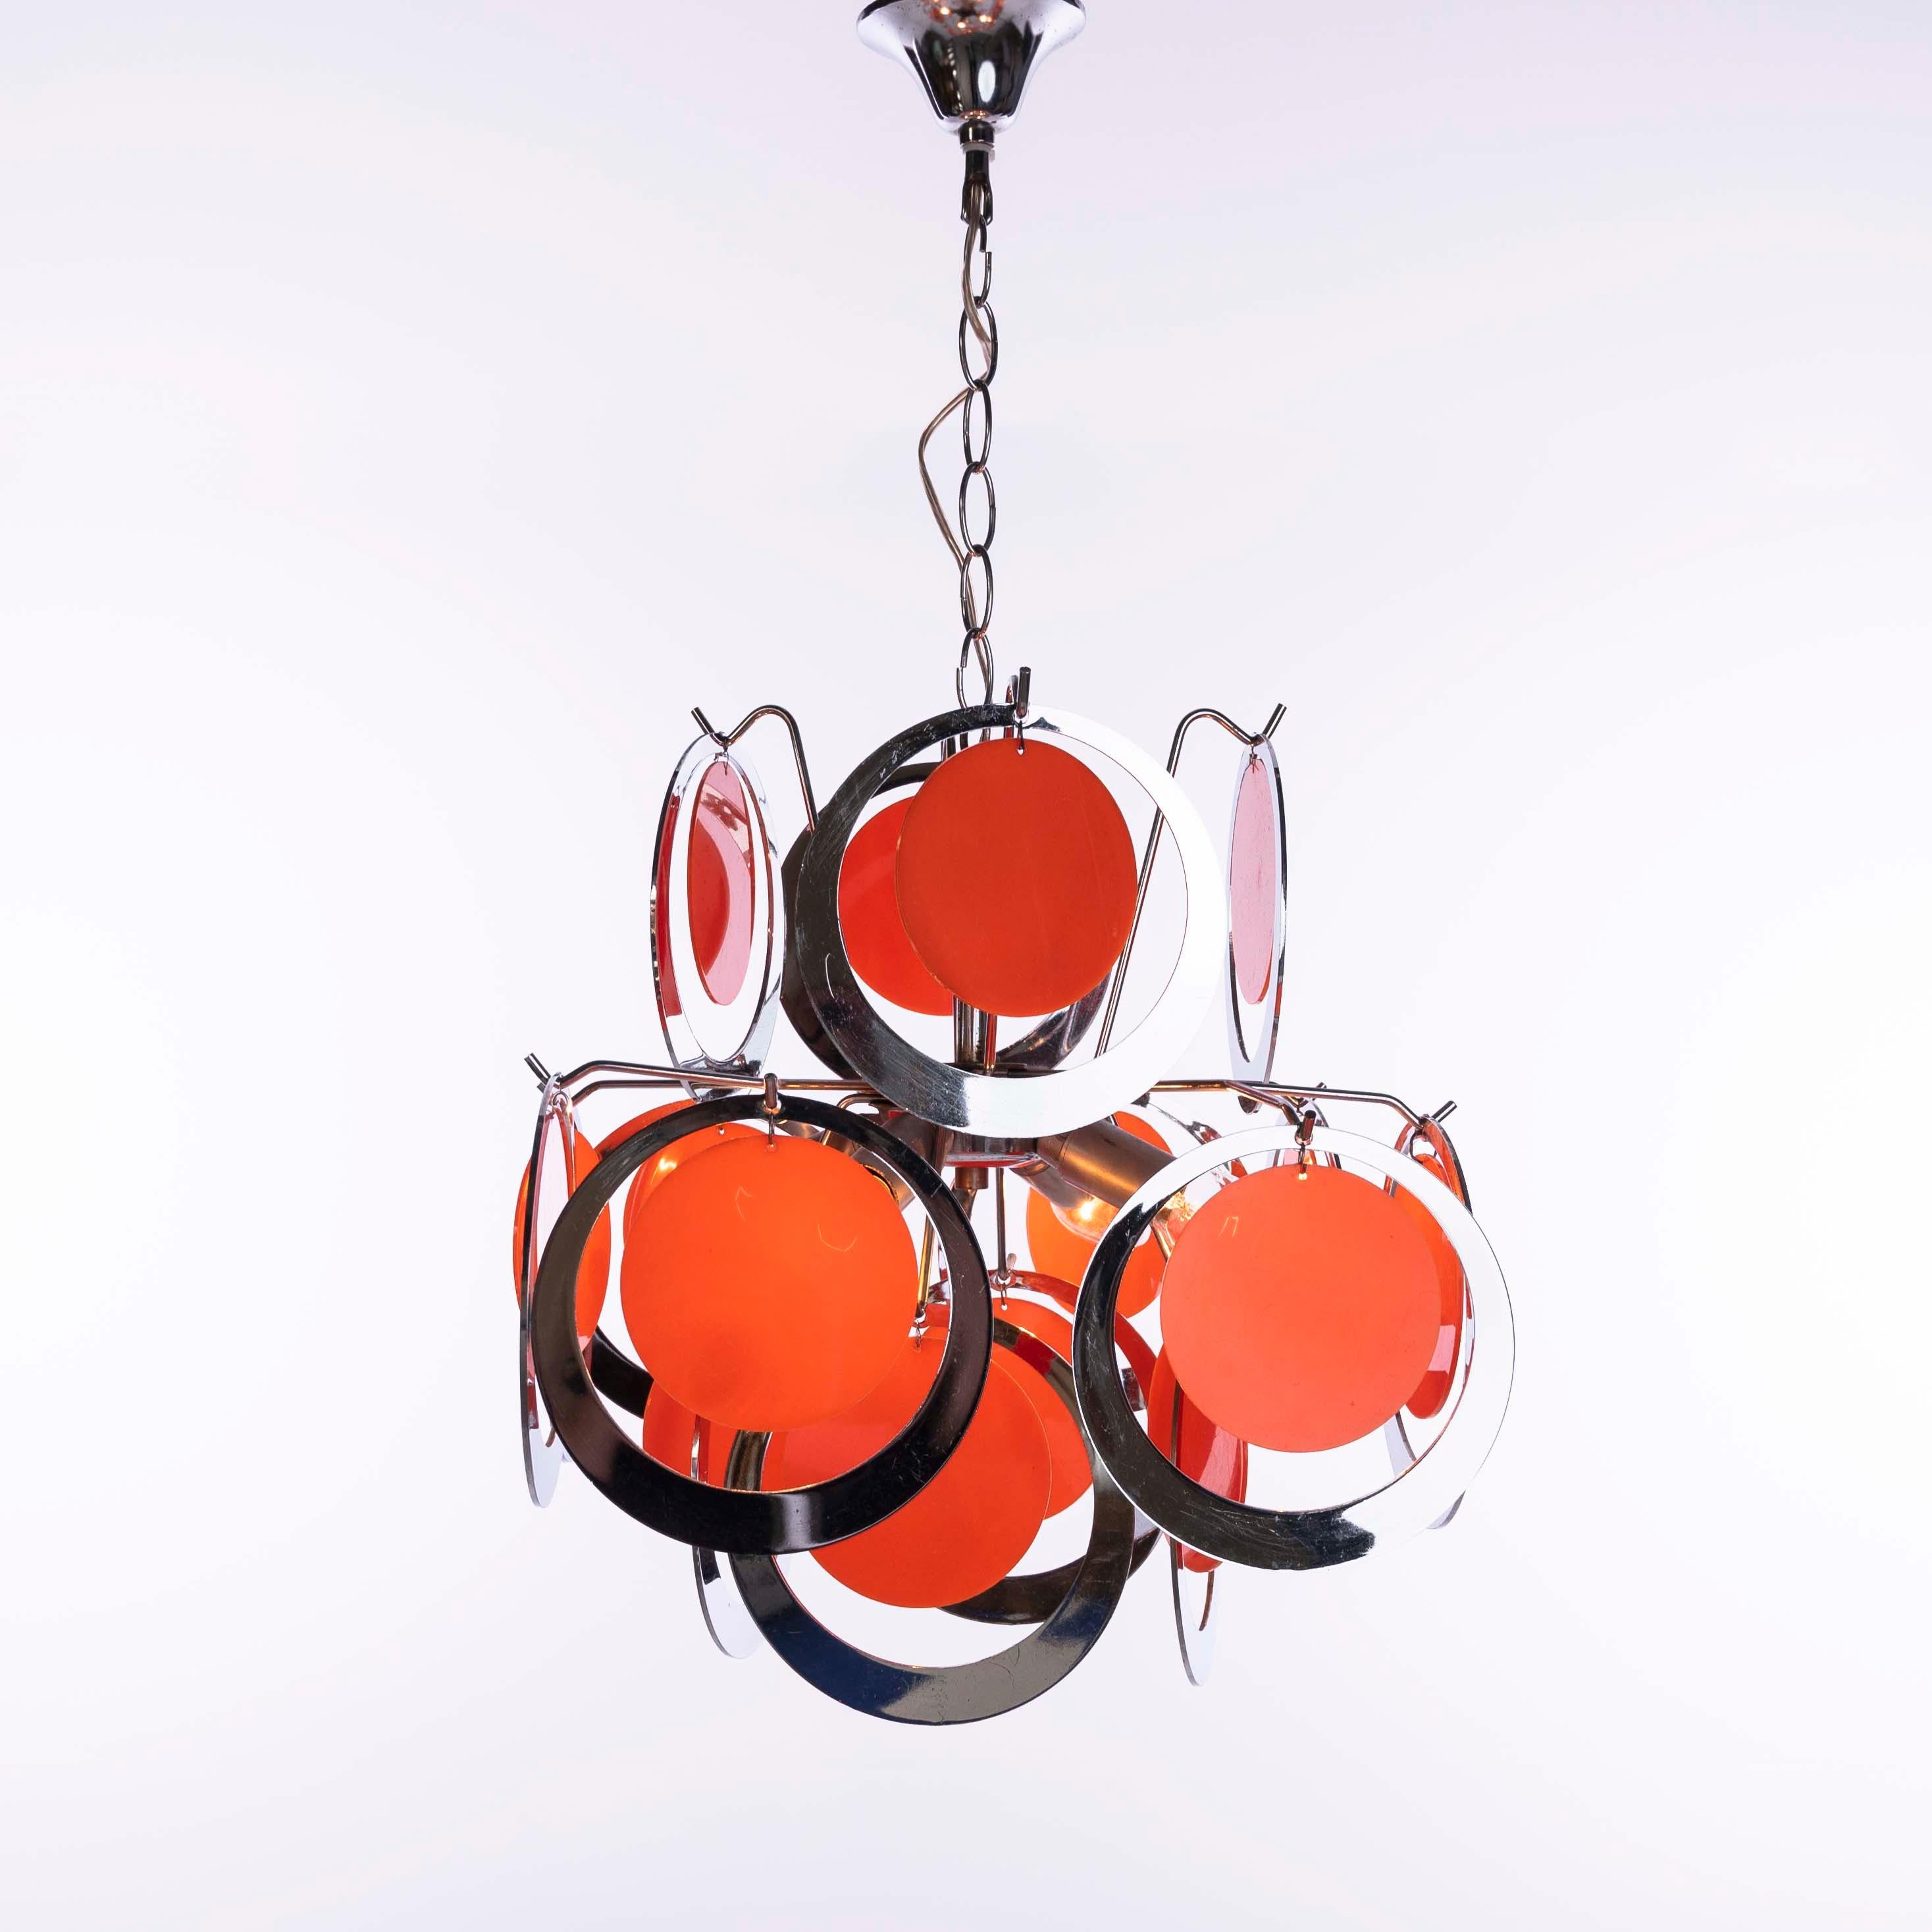 Joyful chandelier with chromed plastic rings and orange plastic circles. Light without chain height 46cm, 4 lightbulbs, 16 round rings plus 16 orange circles.